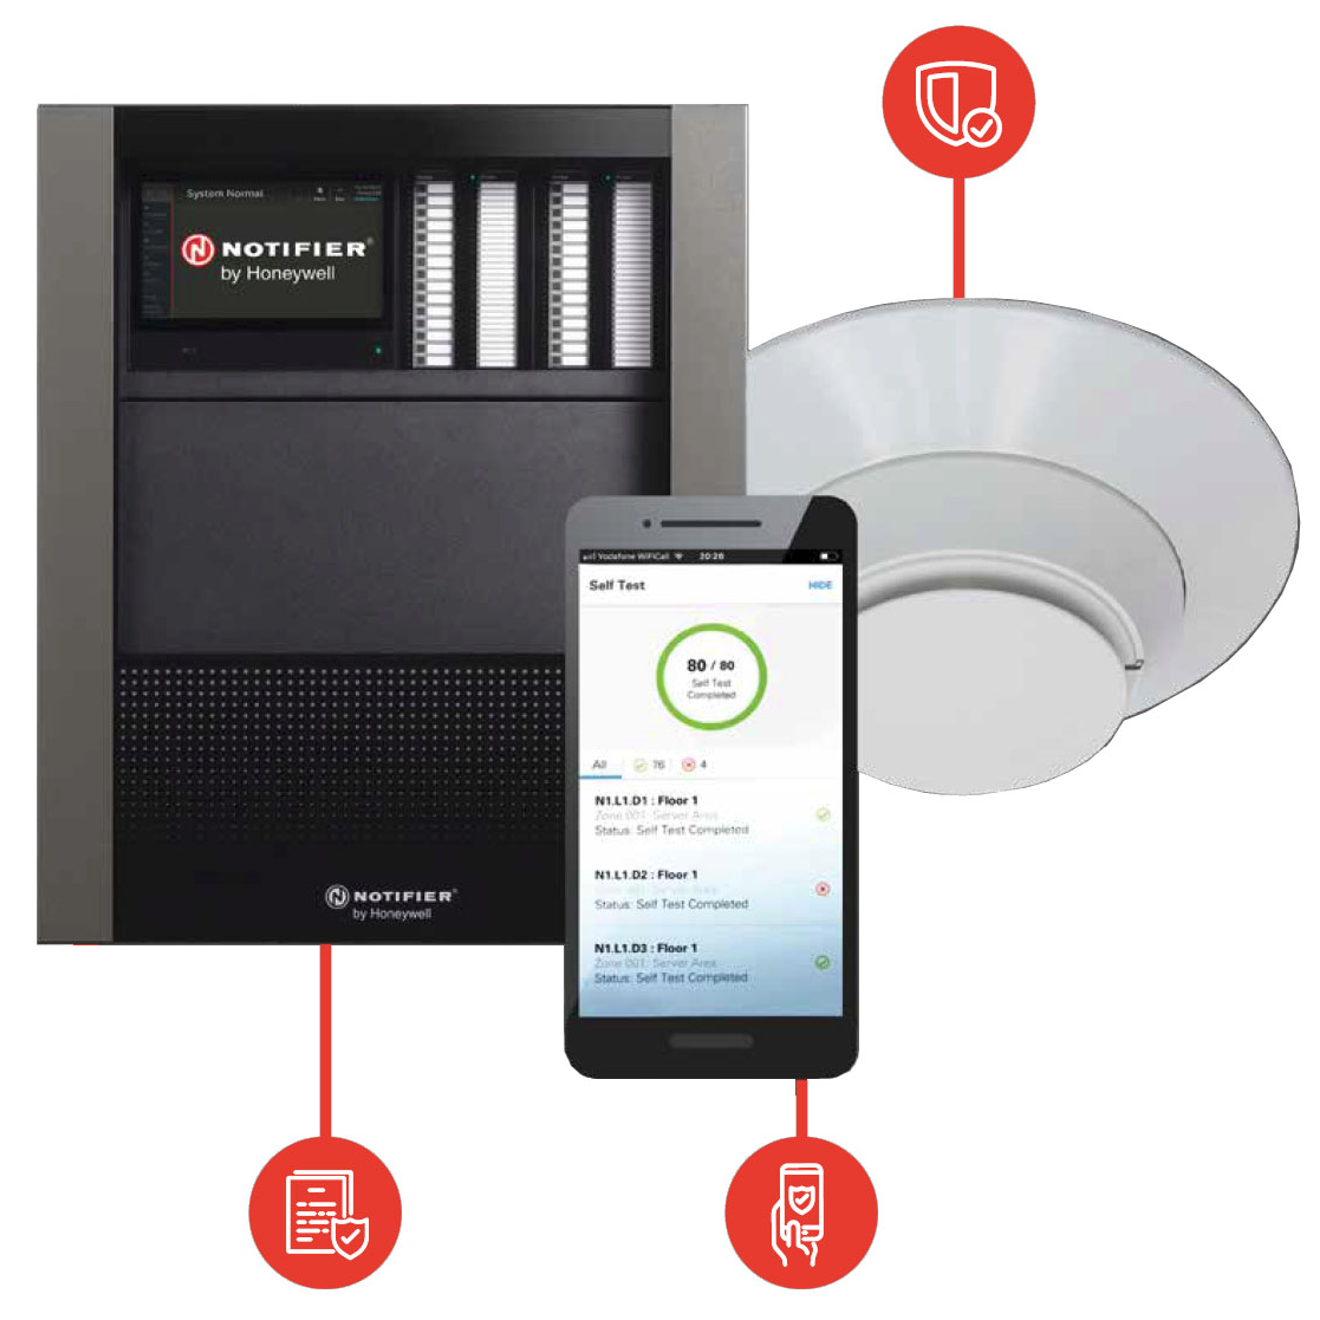 Western States Fire Protection Launches Awareness Campaign for Honeywell’s Connected Life Safety Services (CLSS)